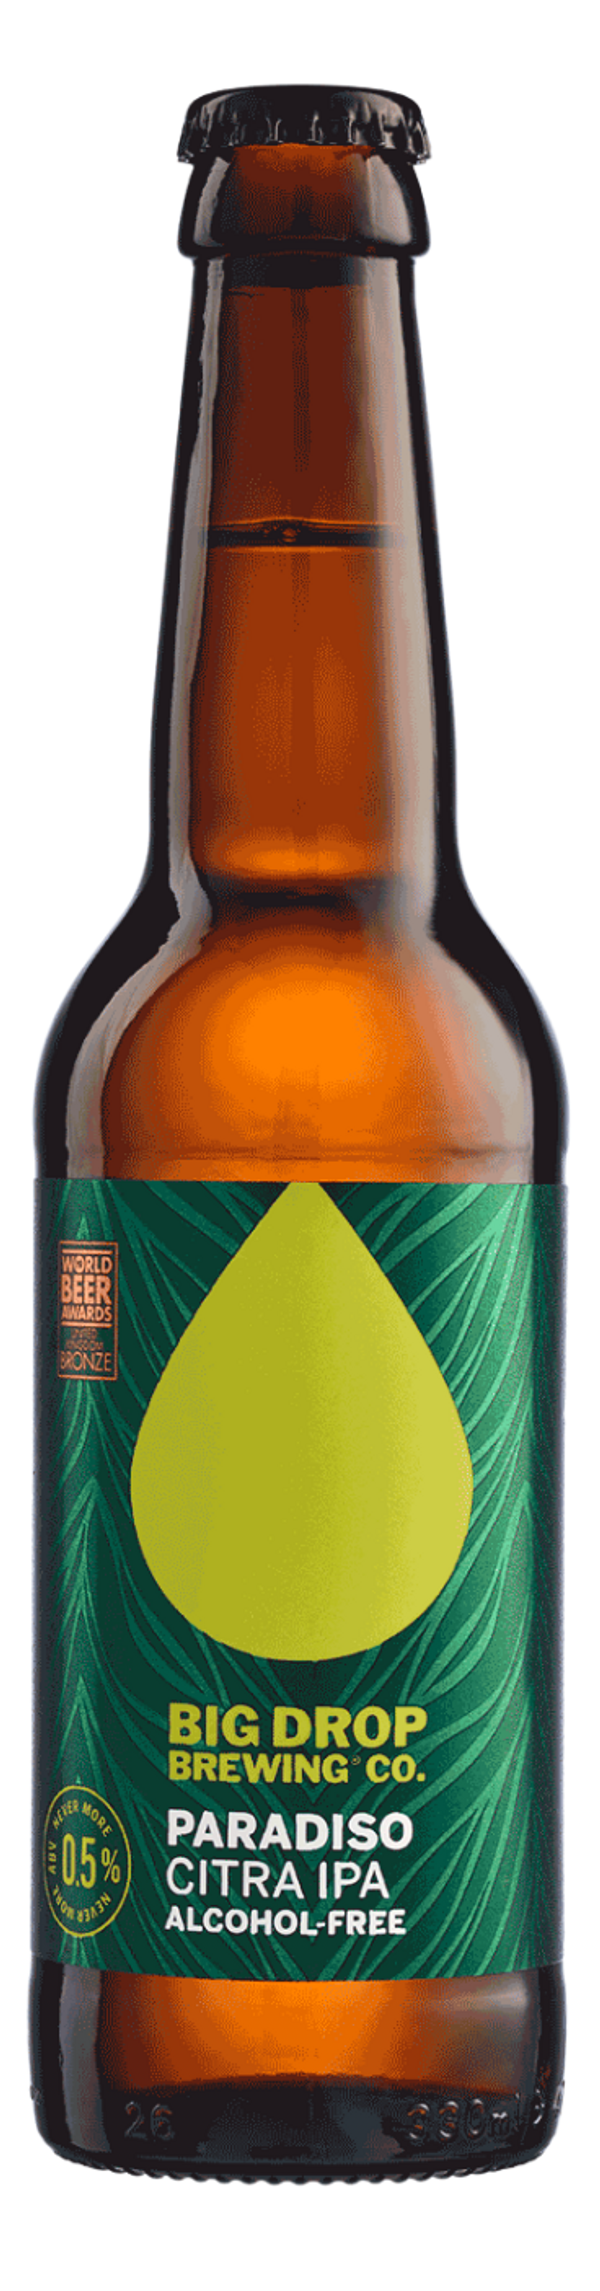 A pack image of Big Drop's Paradiso 12 Bottle Case Citra IPA